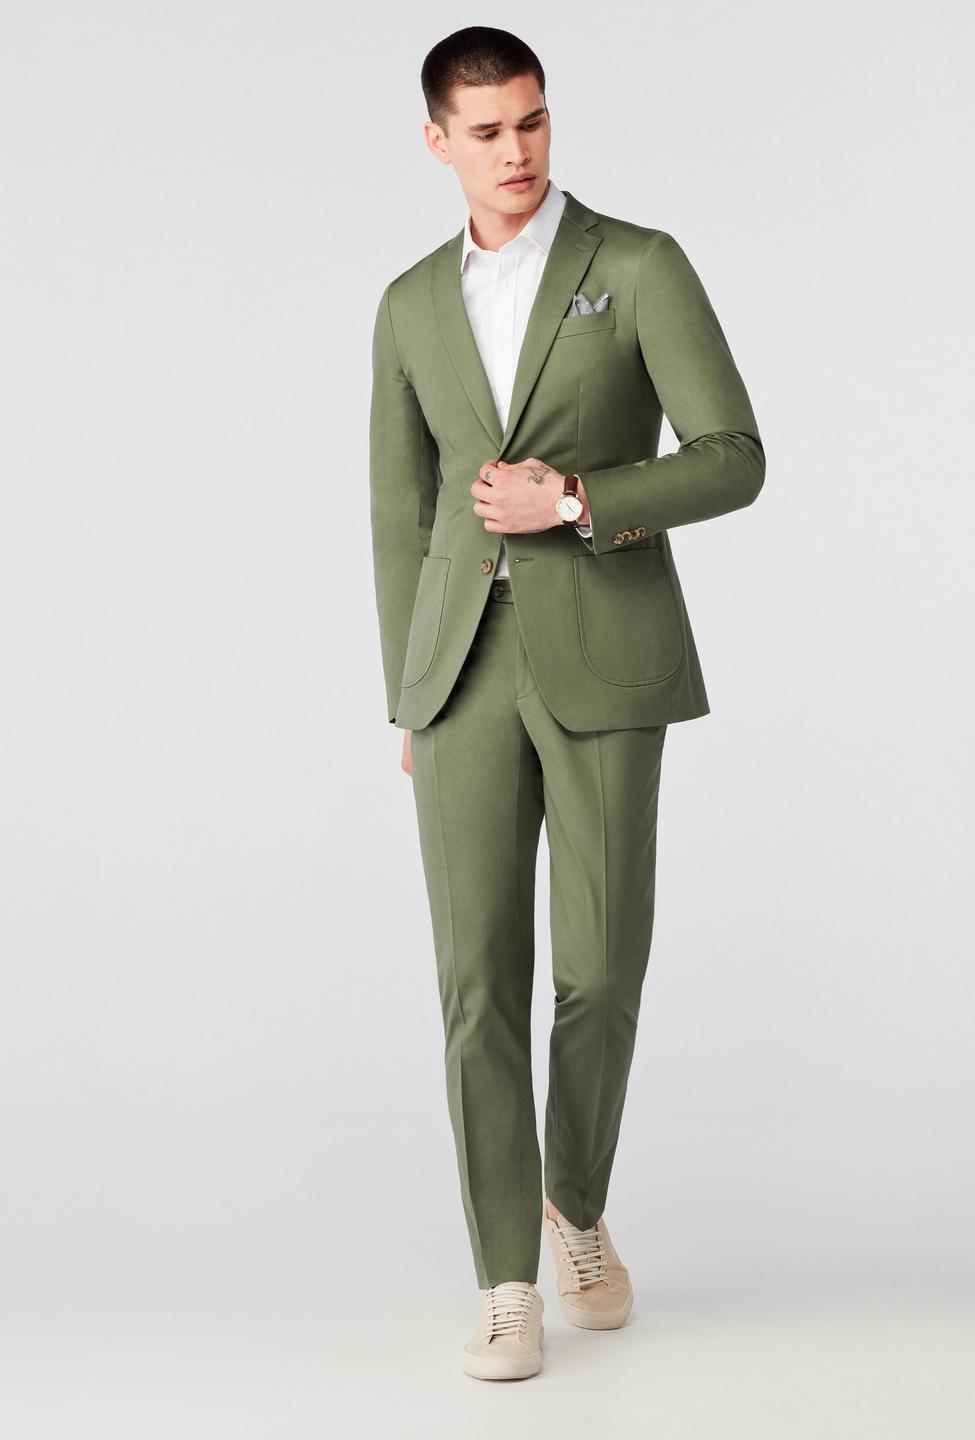 Olive suit - Hartley Solid Design from Premium Indochino Collection